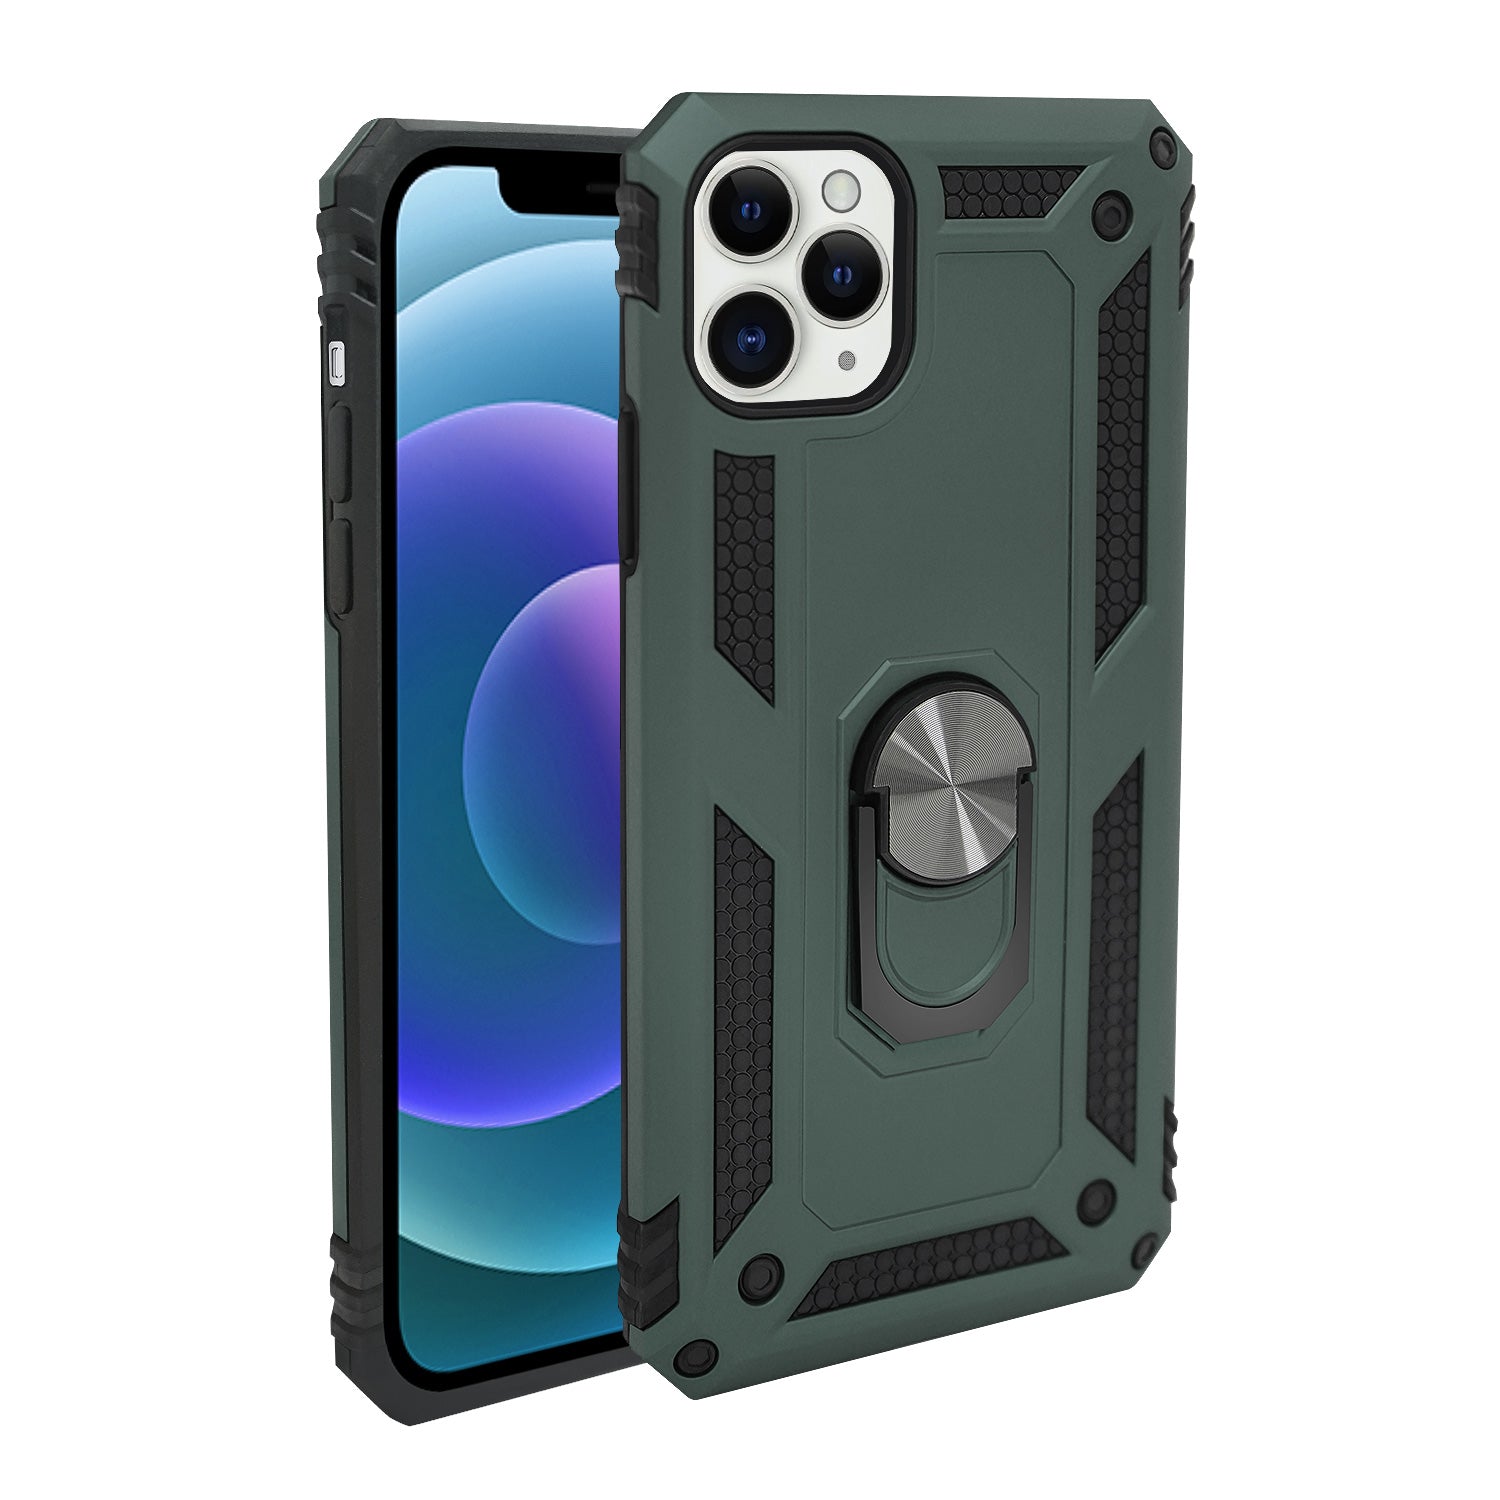 iPhone 11 Pro Max Case - Heavy-Duty, Ring Holder, Camera Cover